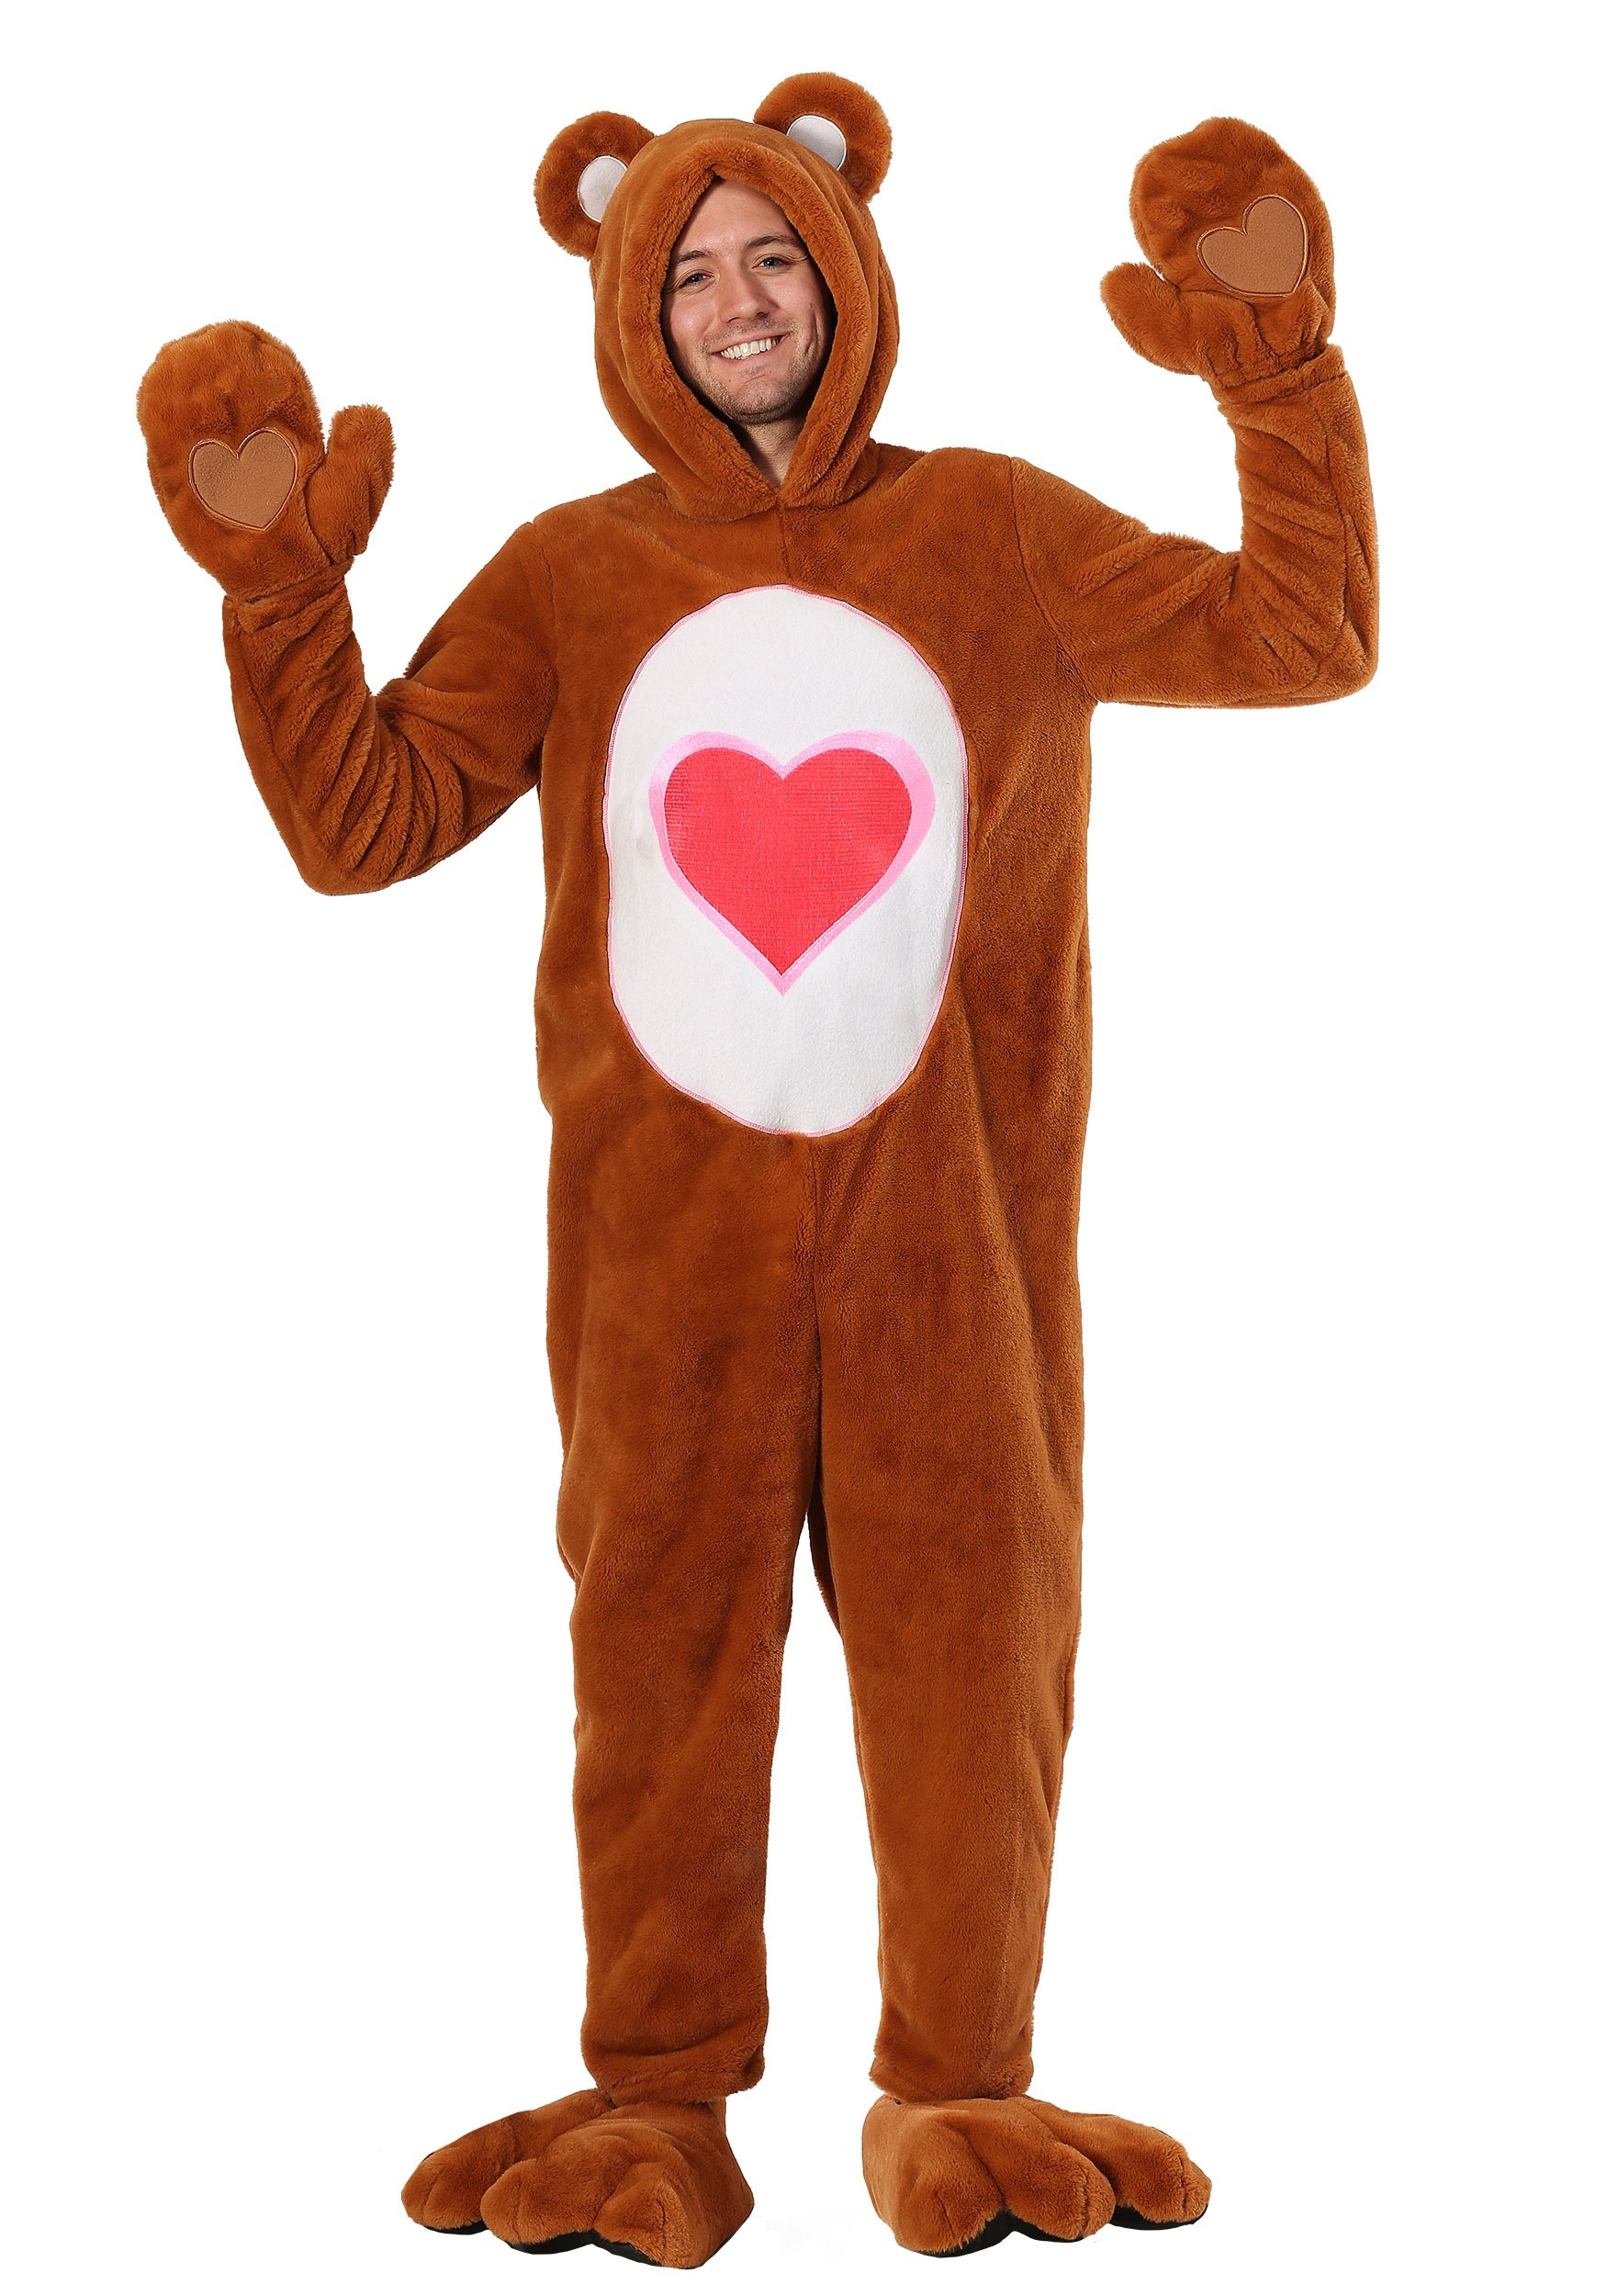 Photos - Fancy Dress CARE FUN Costumes  Bears Deluxe Tenderheart Bear Costume for Adults Yellow 